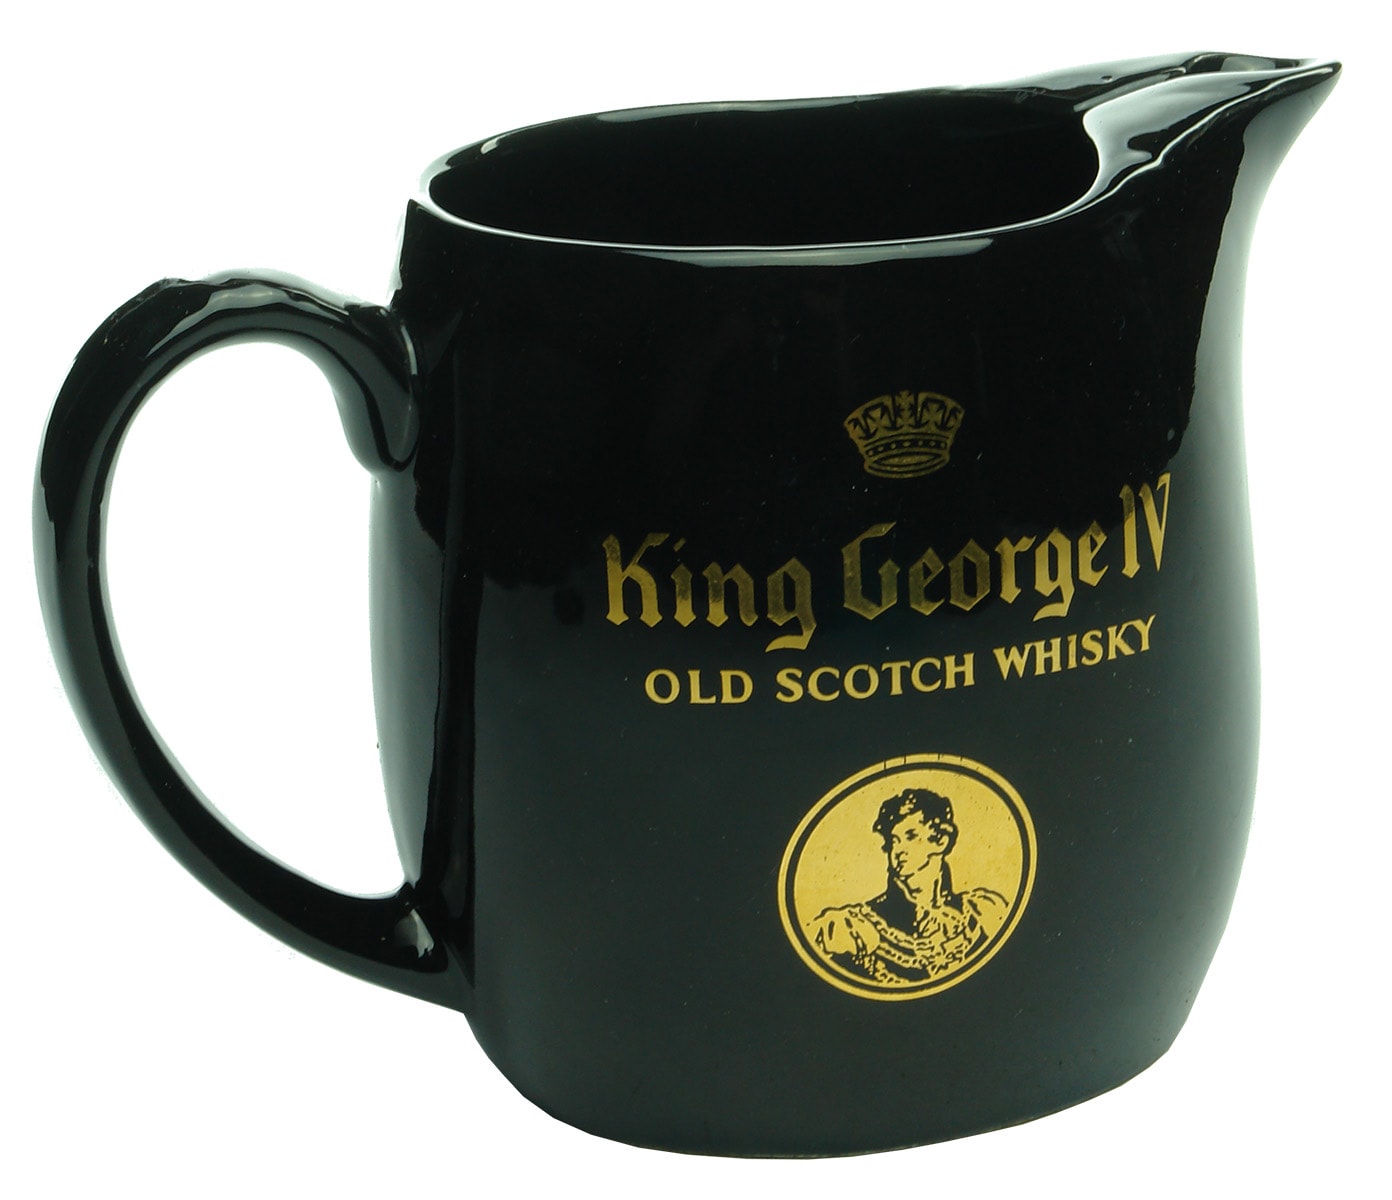 King George IV Old Scotch Whisky Water Jug